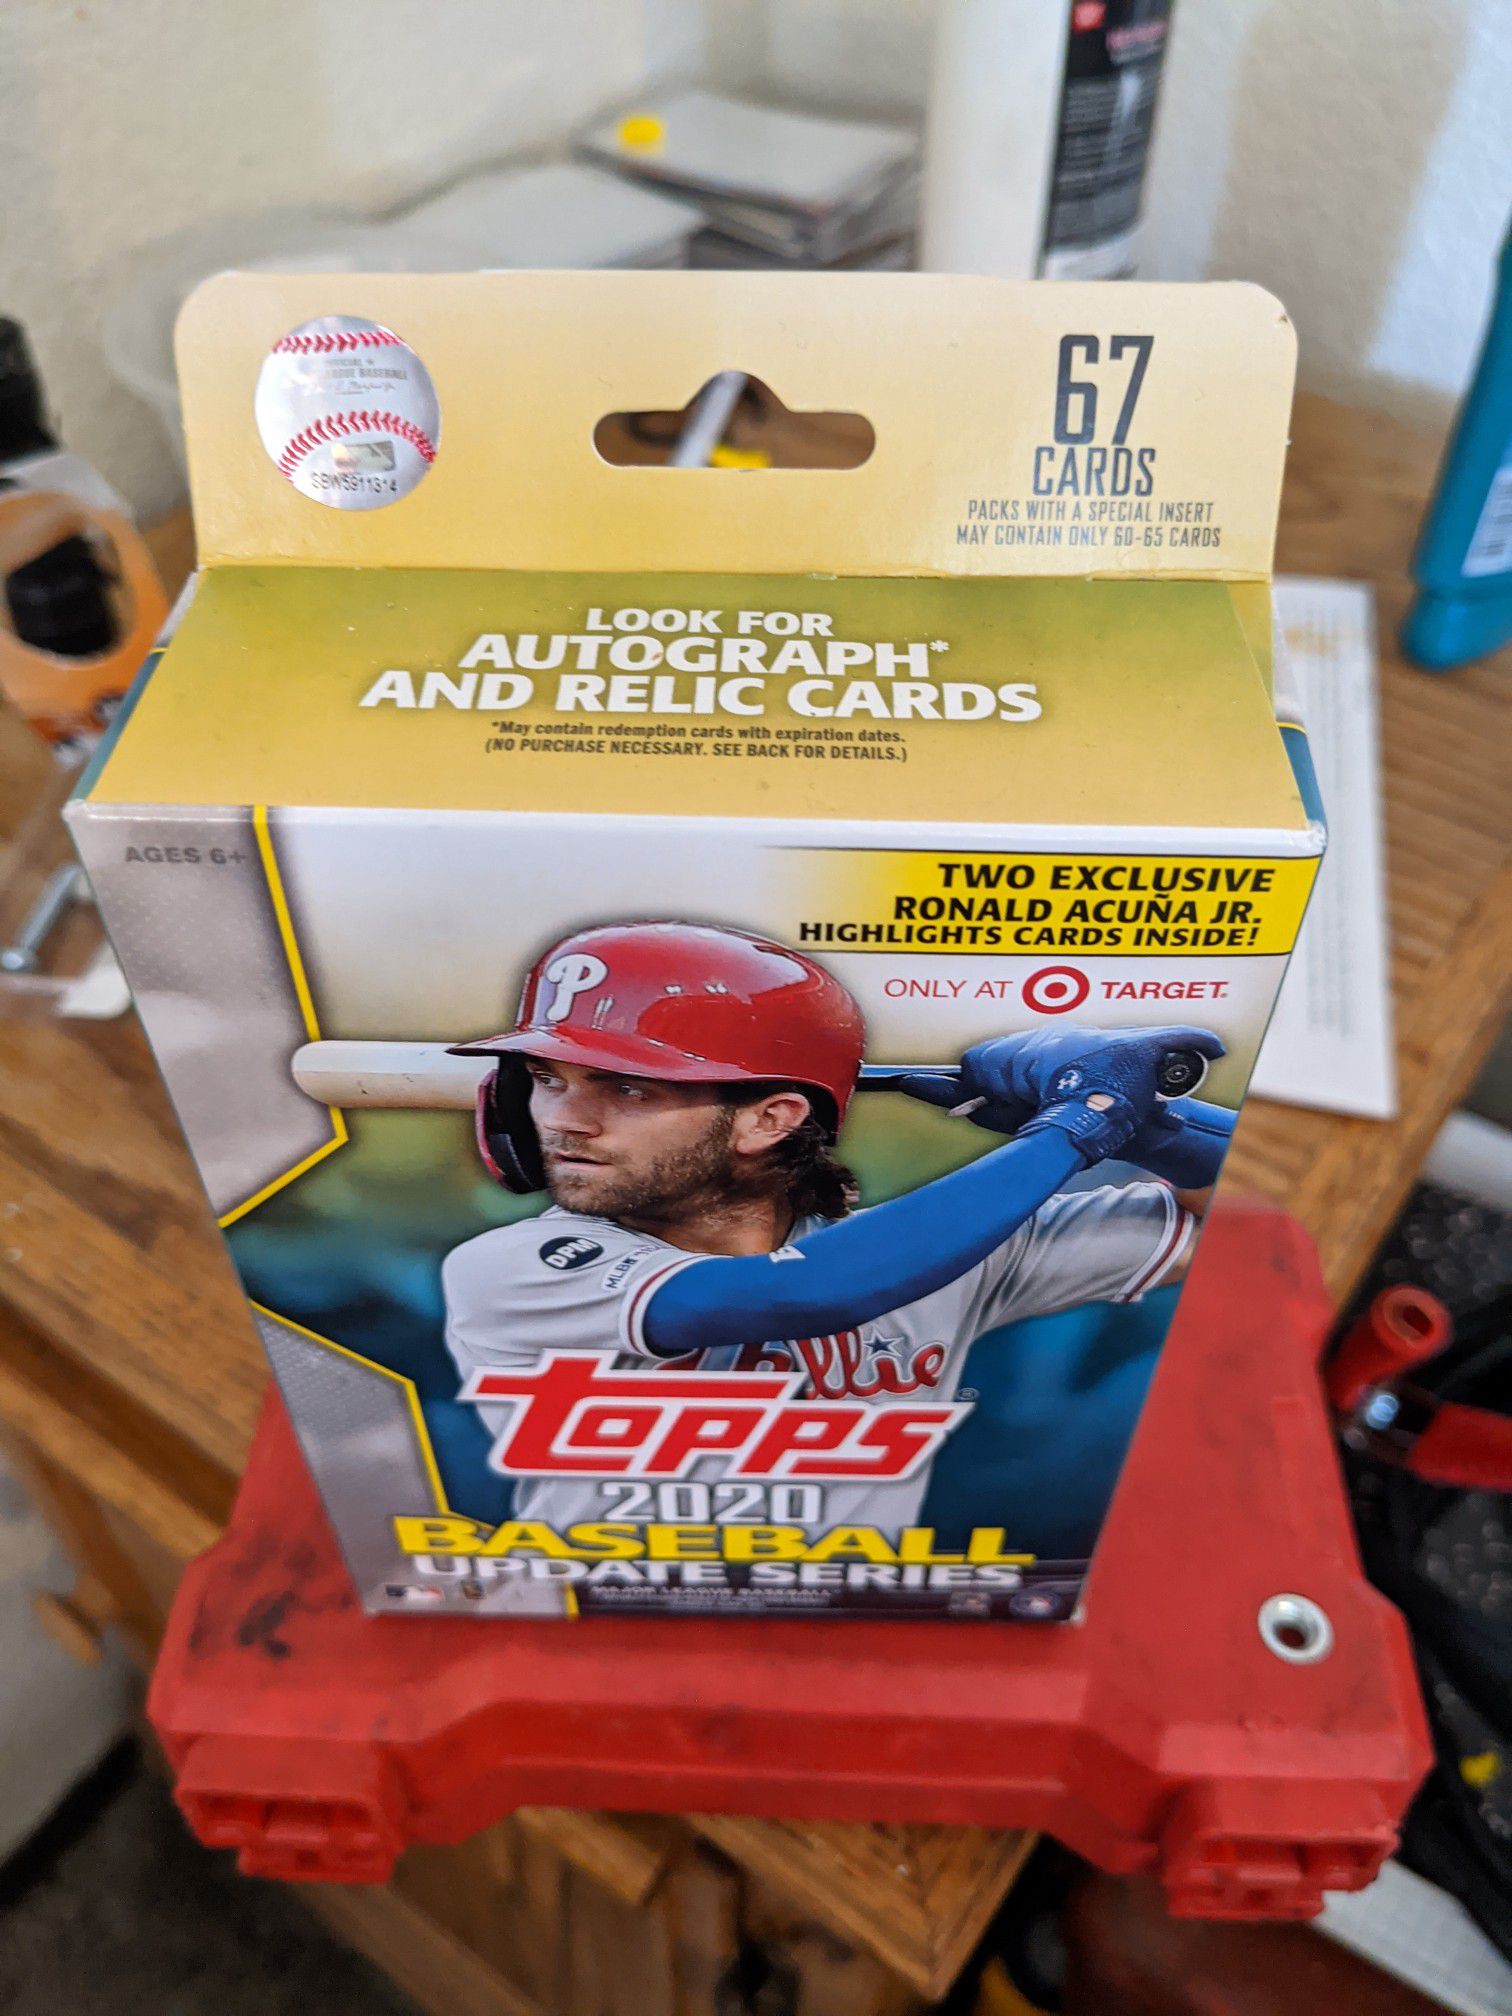 2012 Topps UPDATE Baseball EXCLUSIVE HUGE 67 Card Factory Sealed Hanger Box